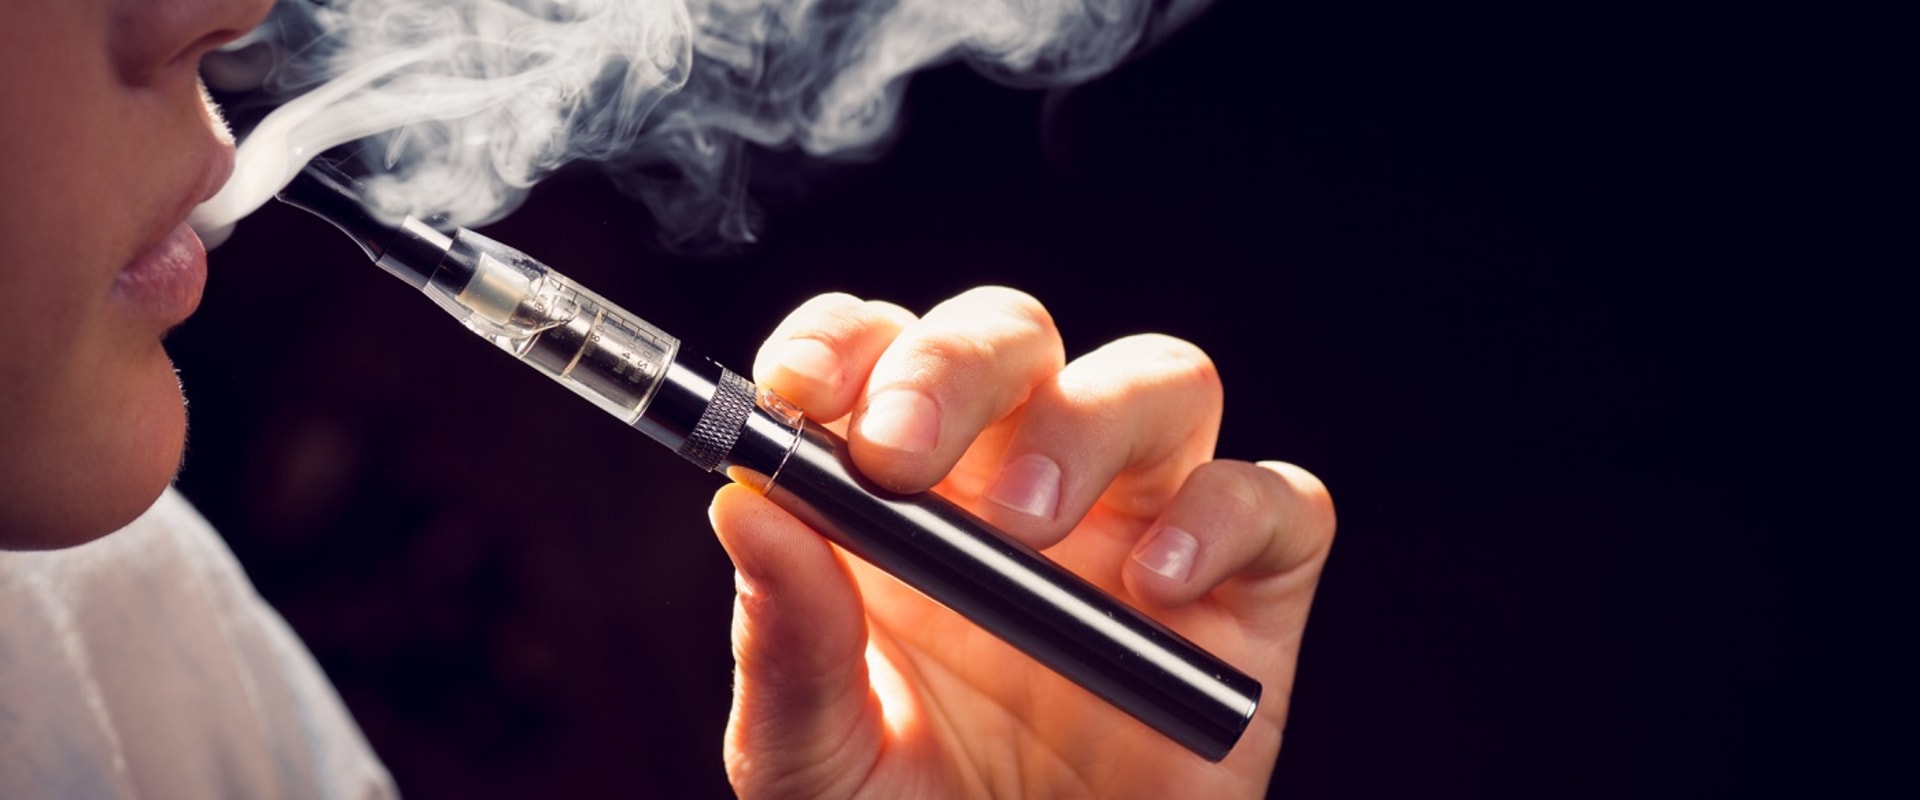 Vaping Indoors and Outdoors: What You Need to Know